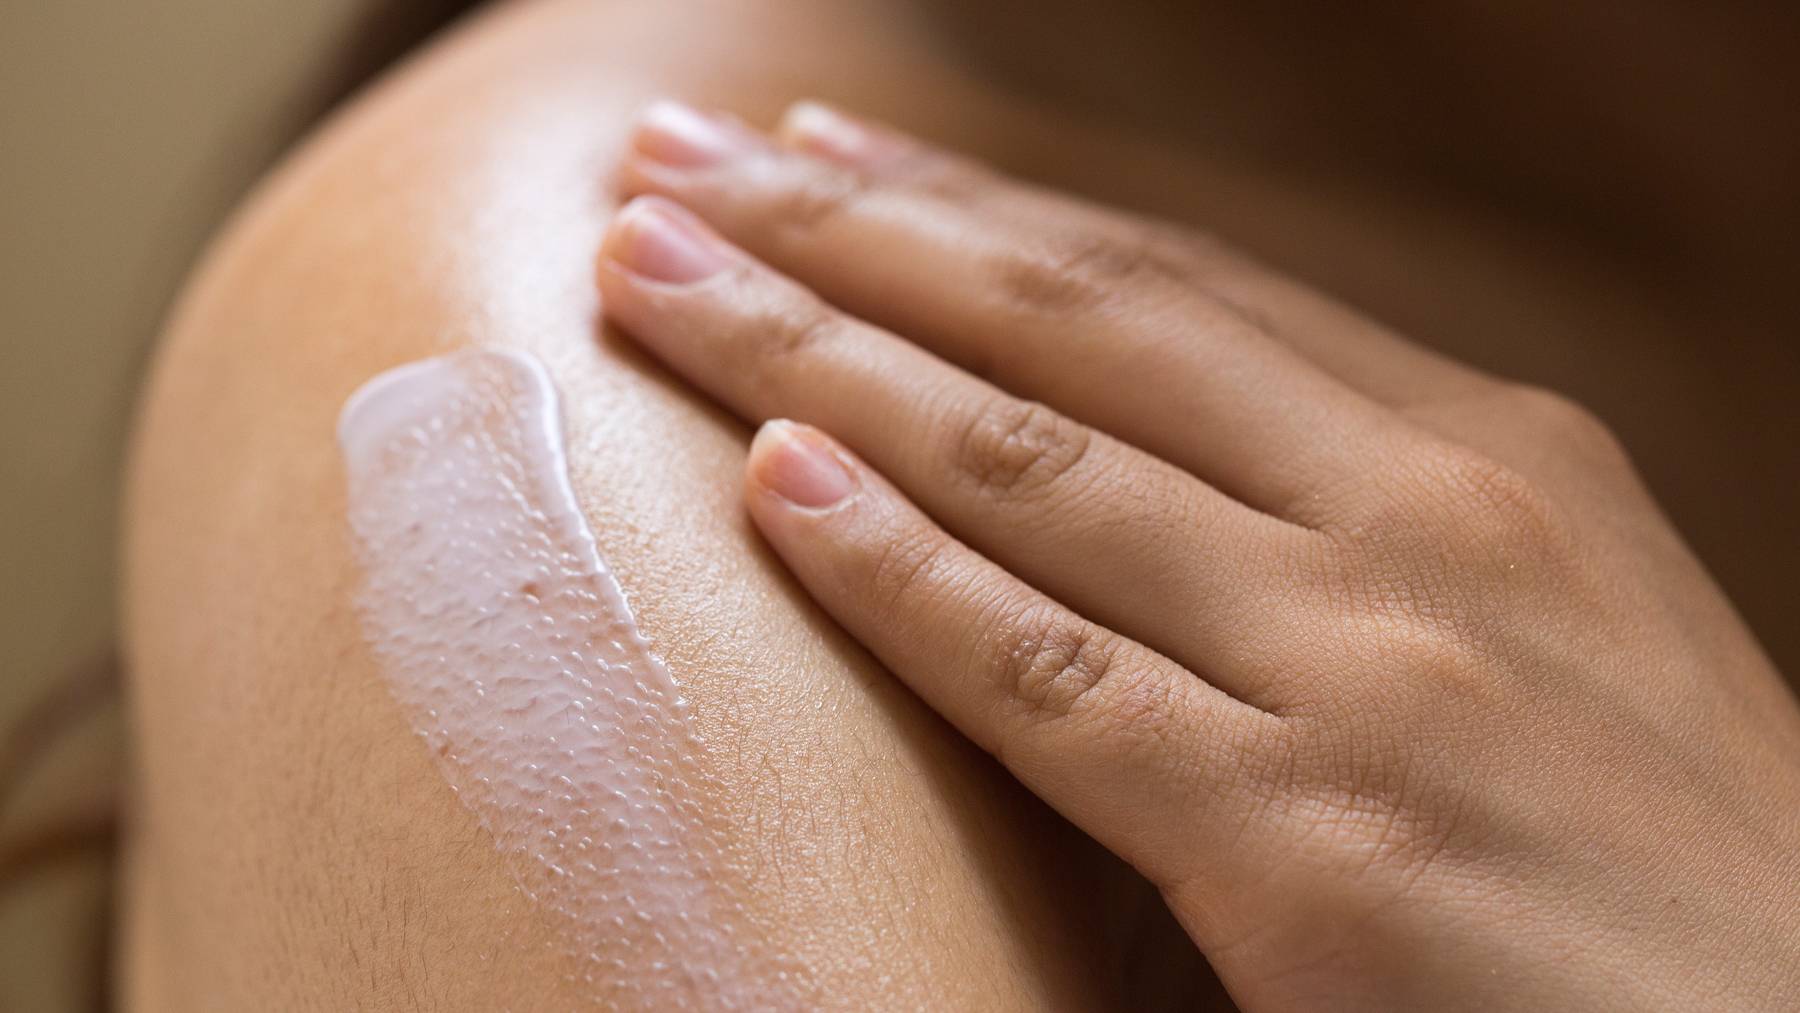 A stroke of Sleepy, a lilac coloured body lotion, rests on a person's shoulder, waiting to be rubbed in by their nearby hand.